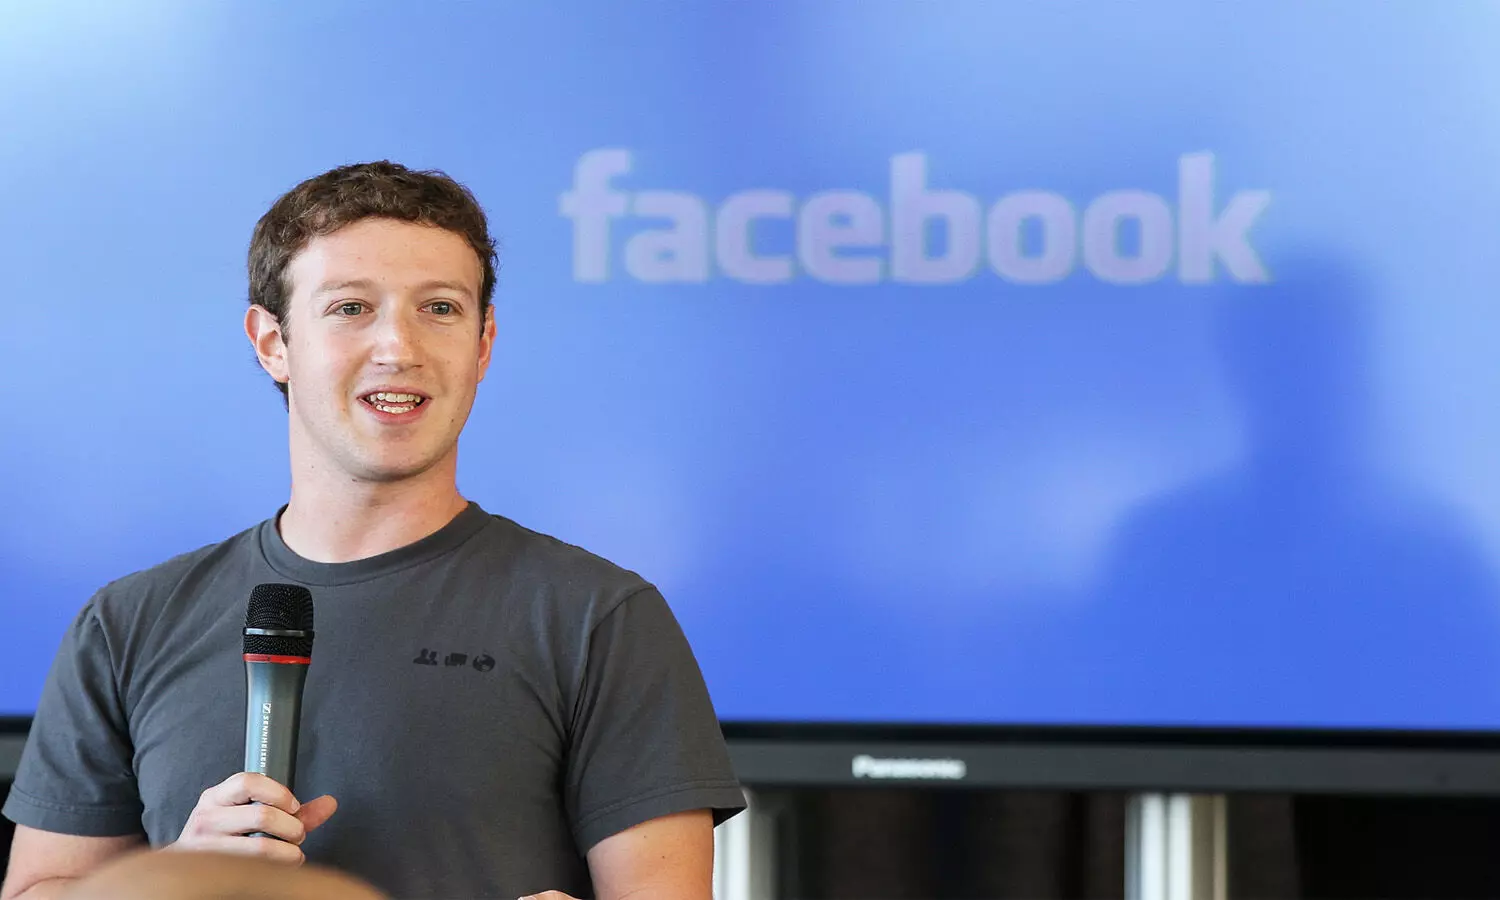 After longest Facebook outage, Mark Zuckerberg issues a personal apology